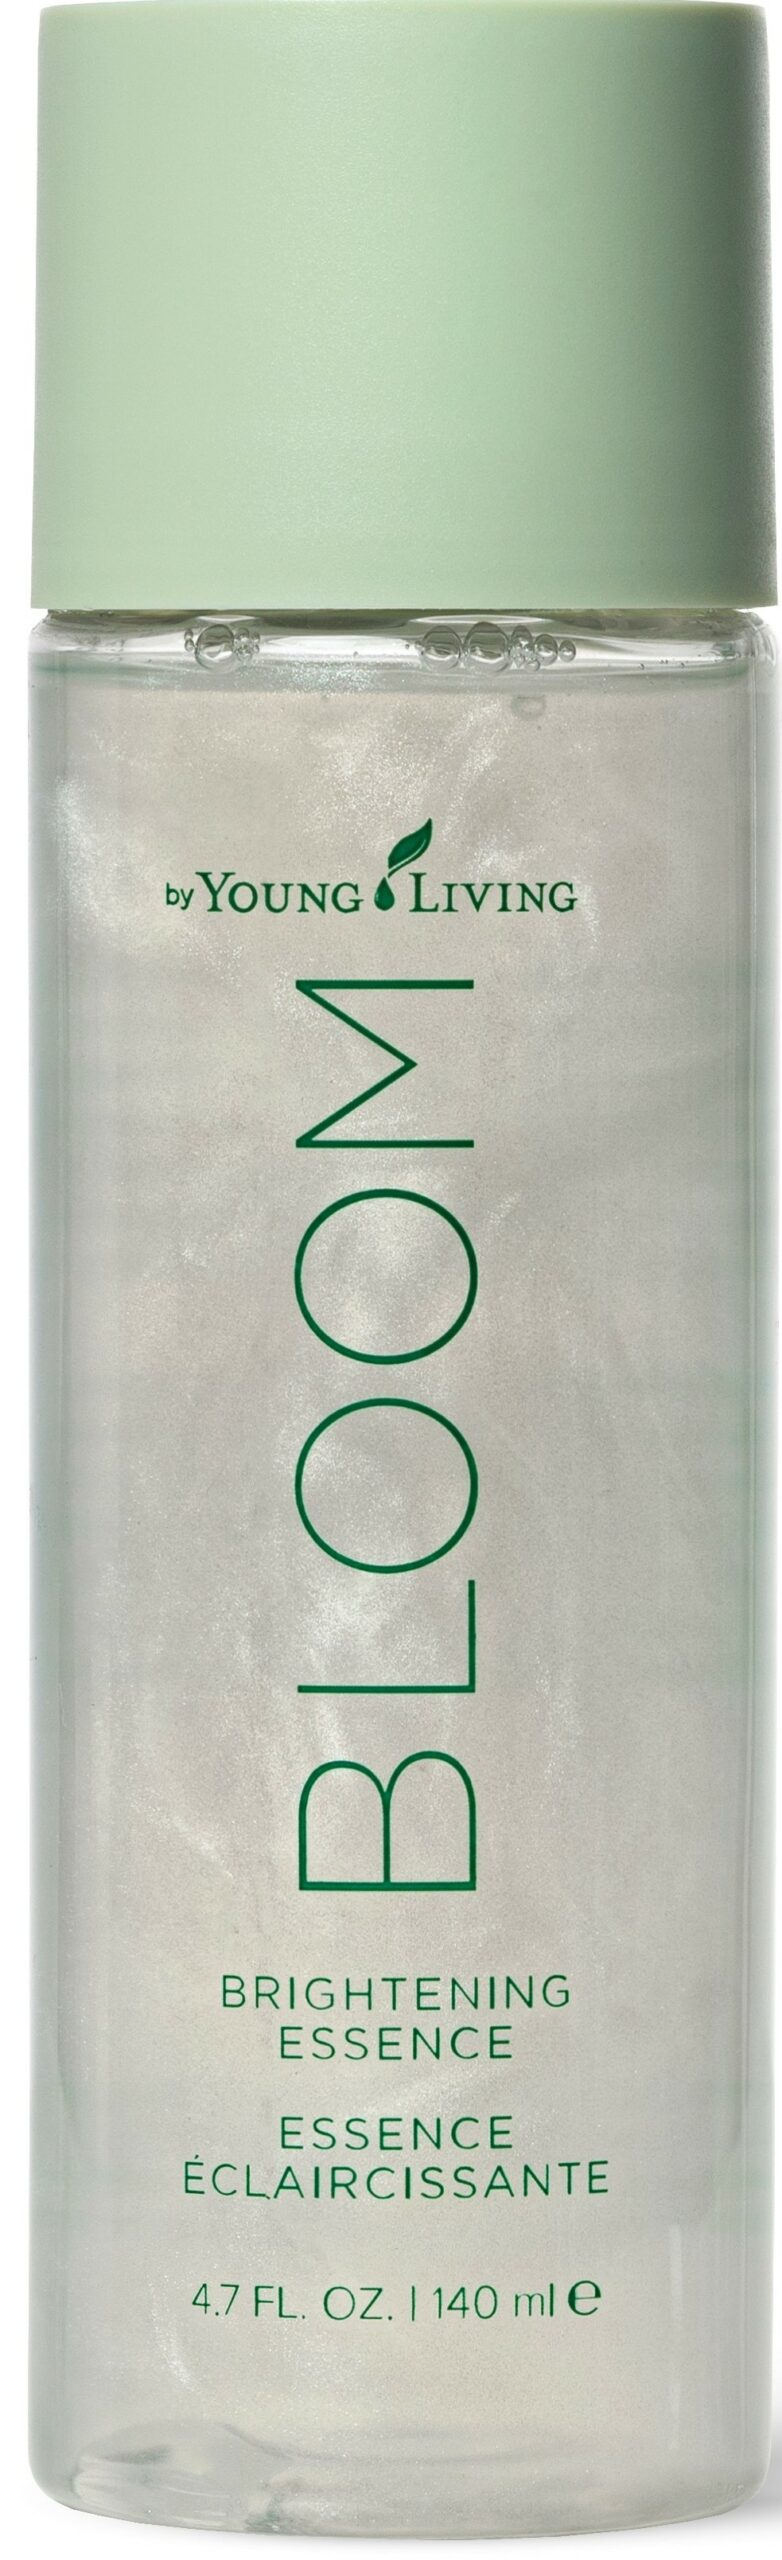 BLOOM Brightening Essence - Young Living Essential Oils 